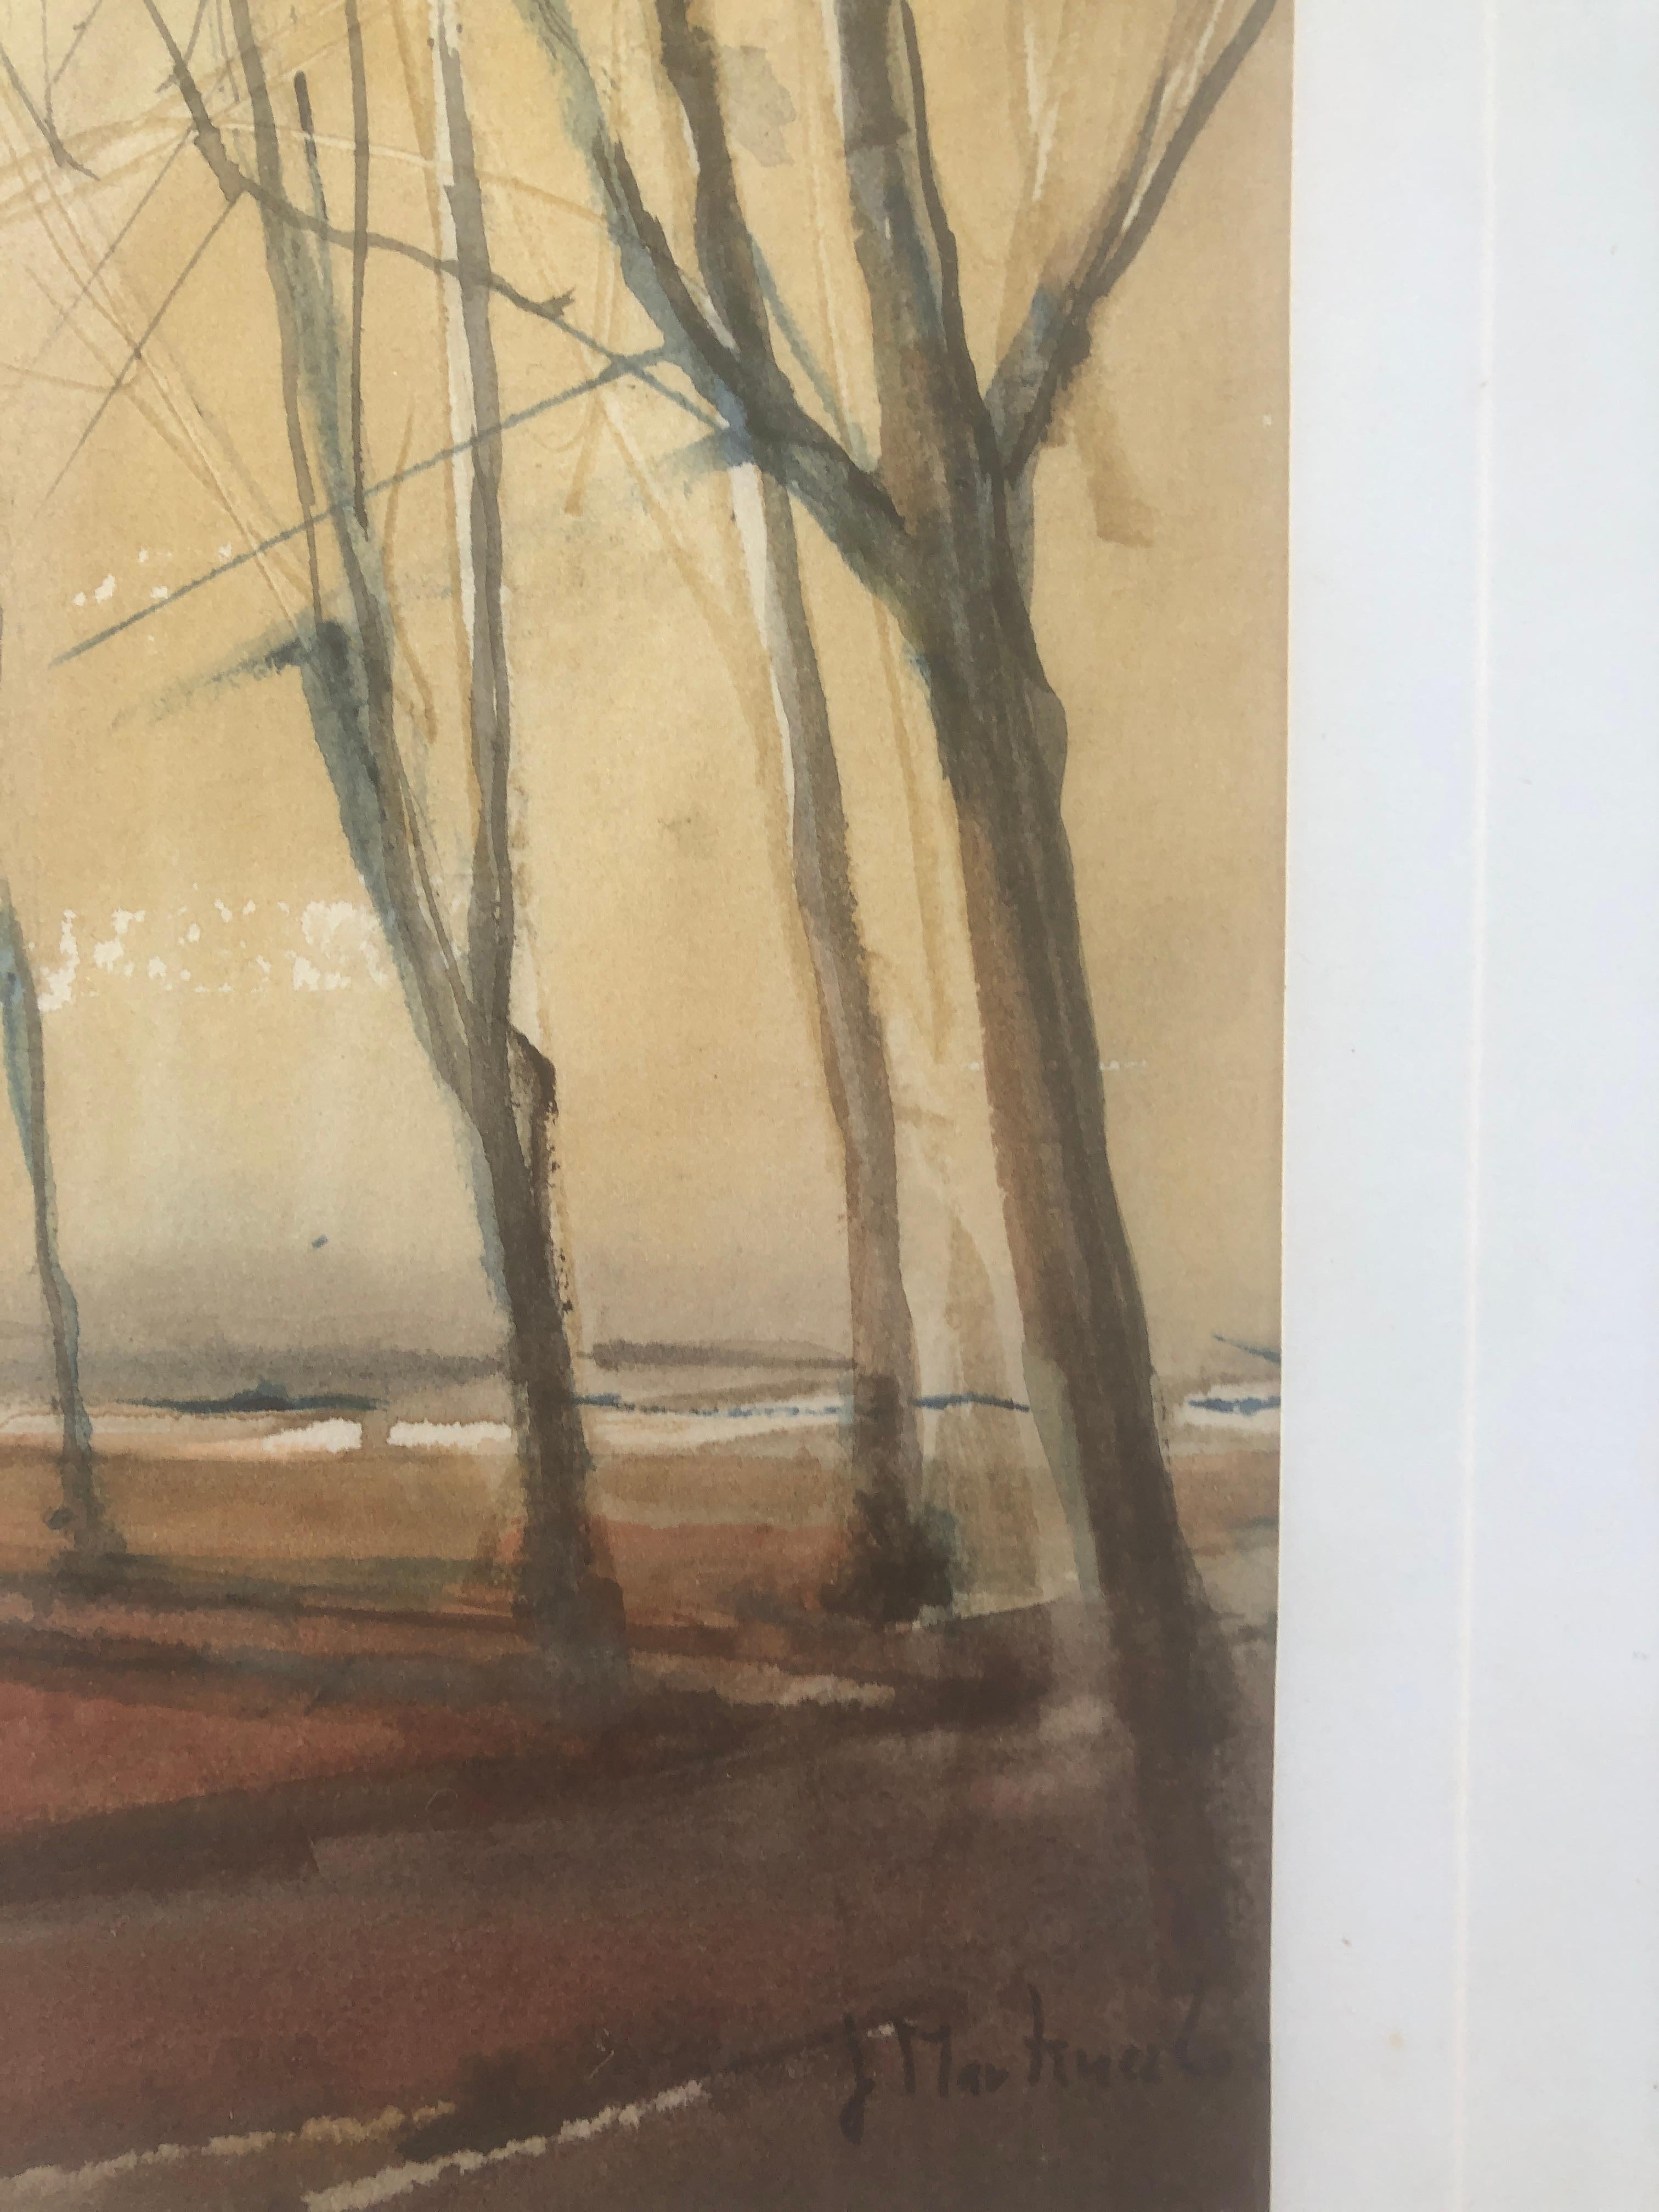 José Martinez Lozano - Landscape - Watercolor

Watercolor measurements 24x11 cm.

Frame measurements 37x24 cm.

Josep Martínez Lozano was born in the Born district of Barcelona on March 29, 1923.

During his childhood he does not feel any kind of